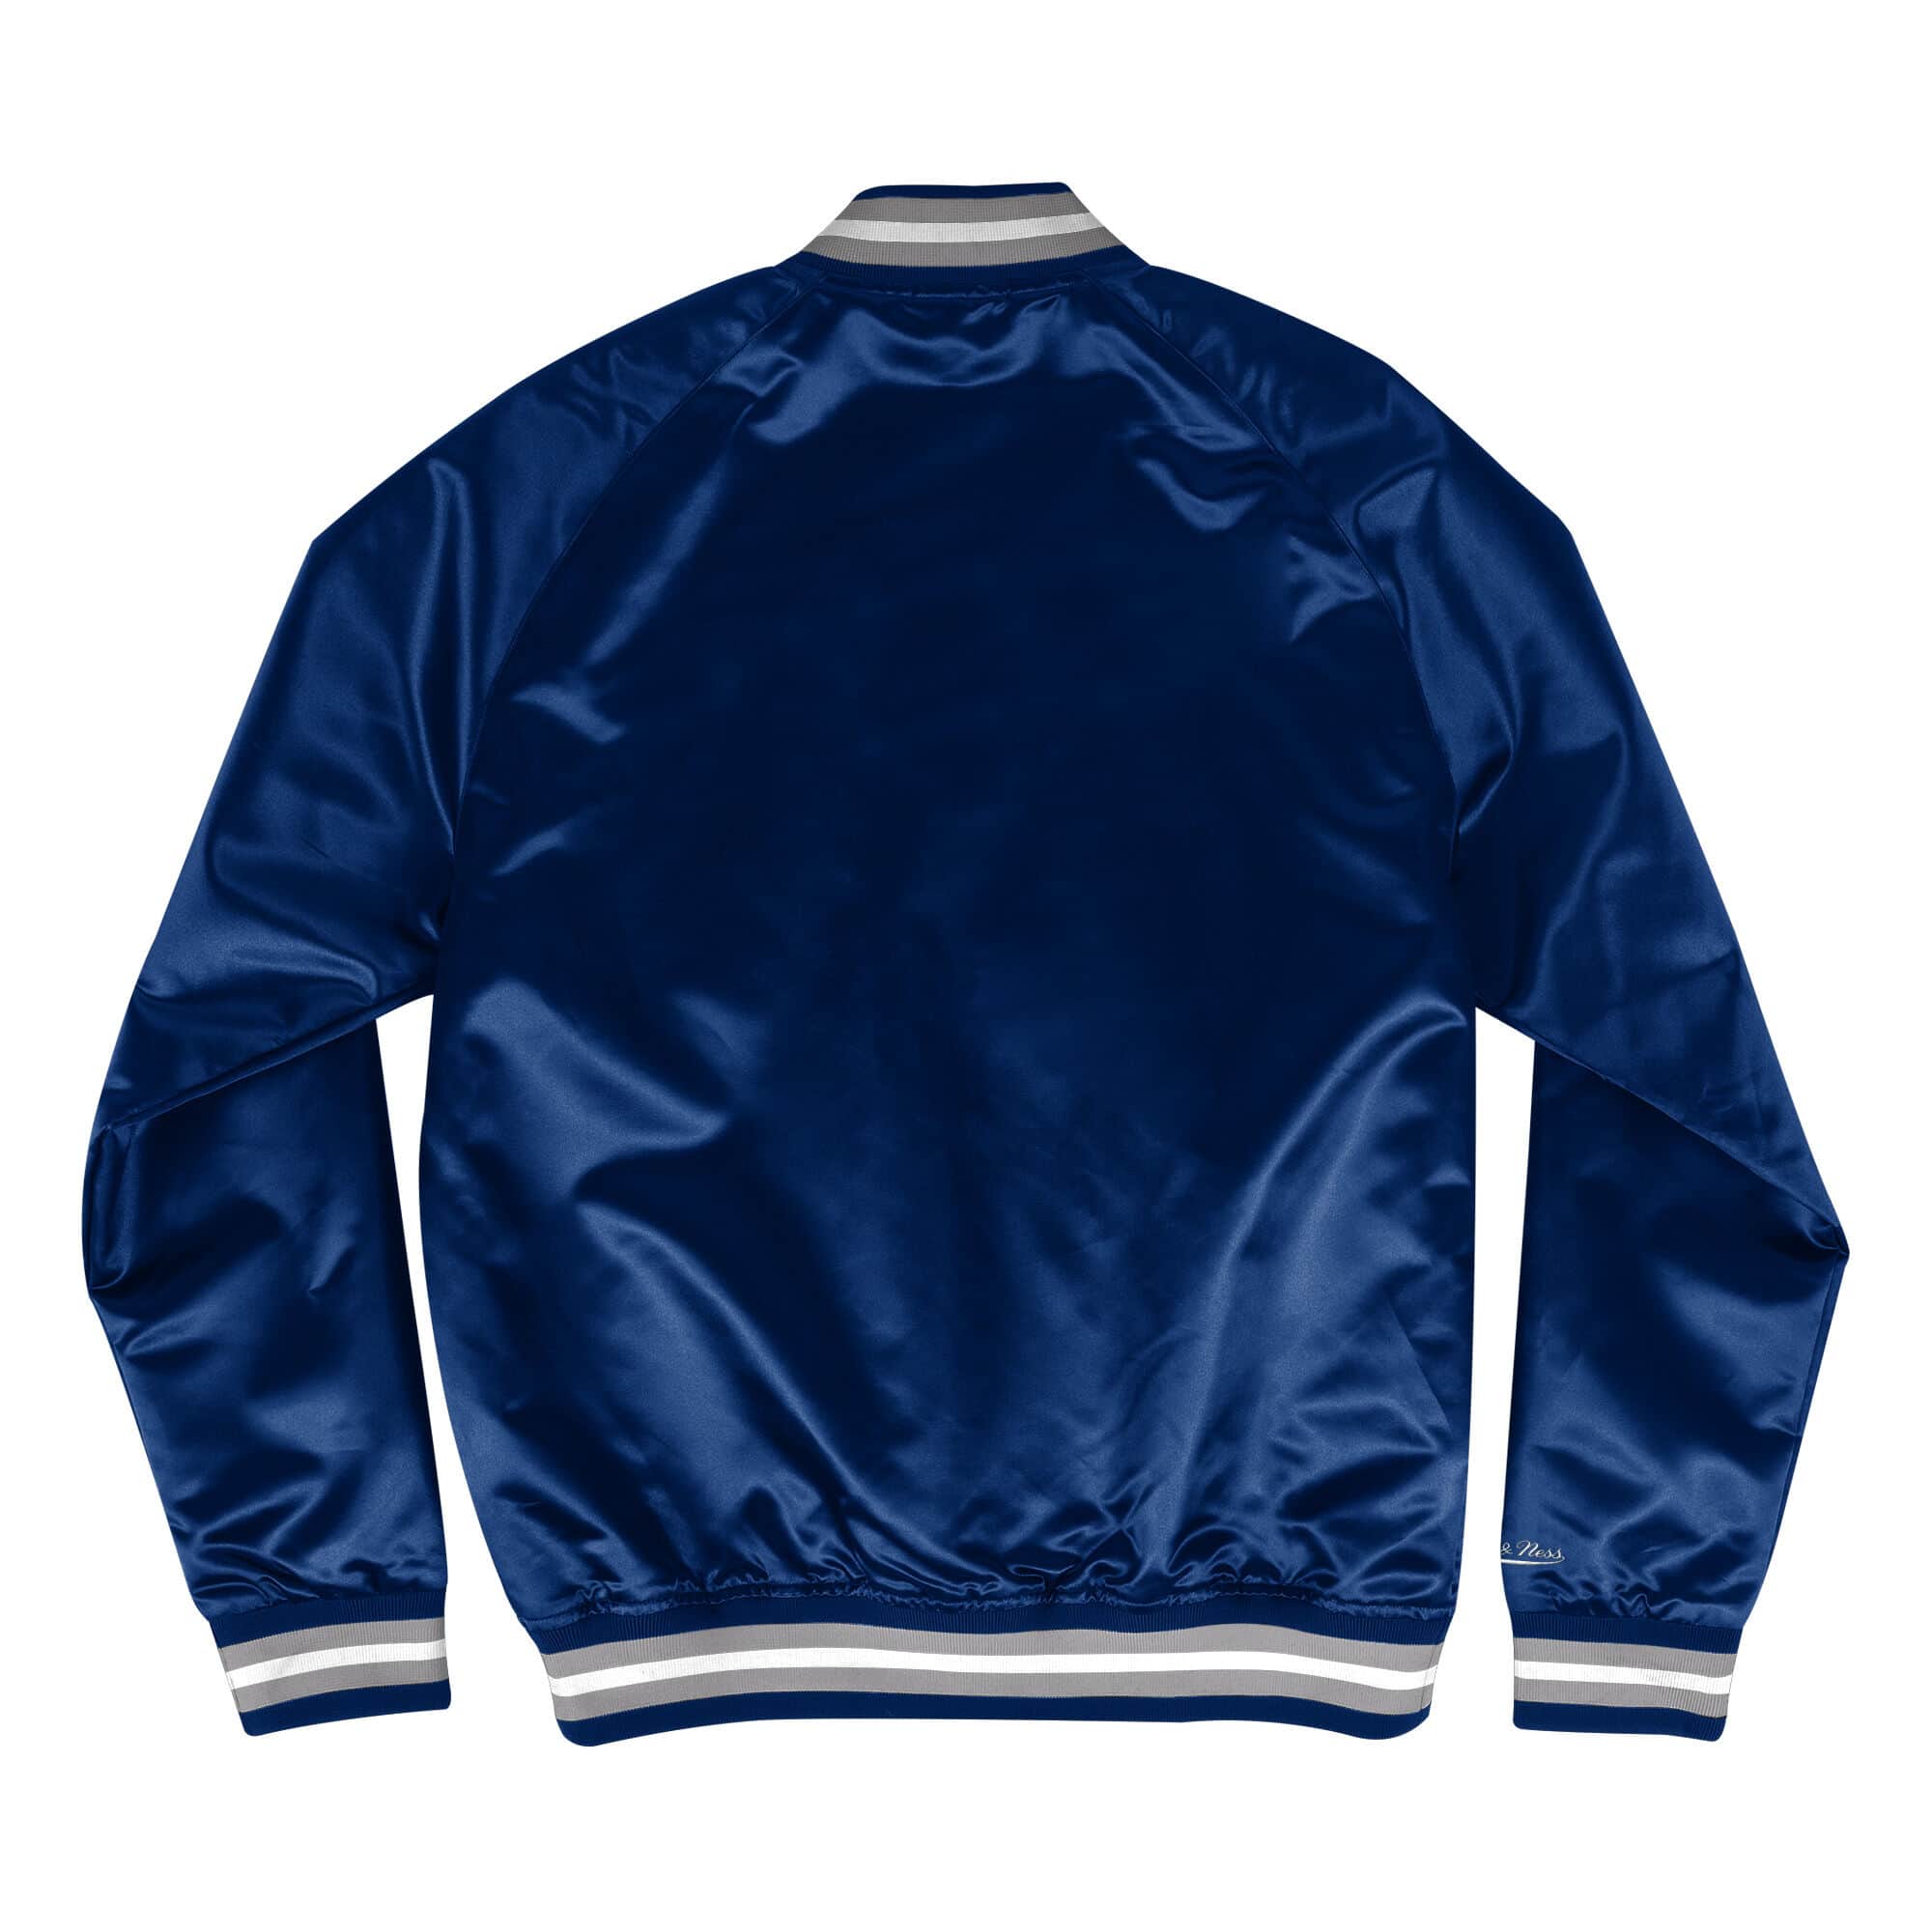 Mitchell & Ness Blue Active Jackets for Men